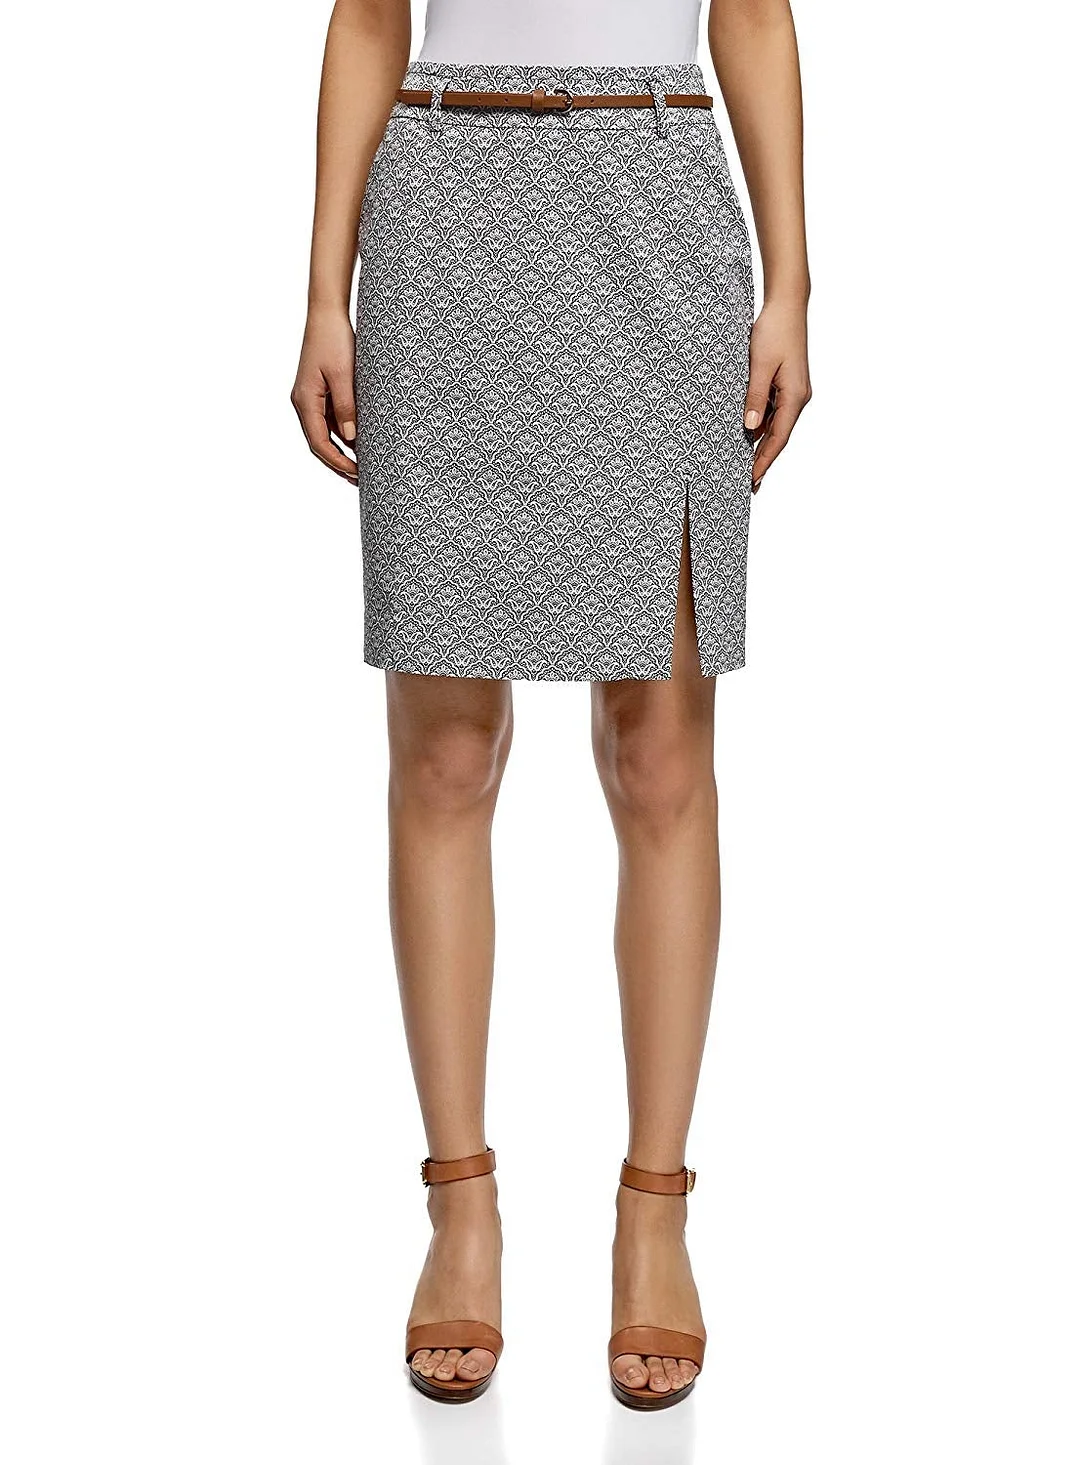 Women's Straight Belted Skirt Mid-length pencil skirt with belt and side split.